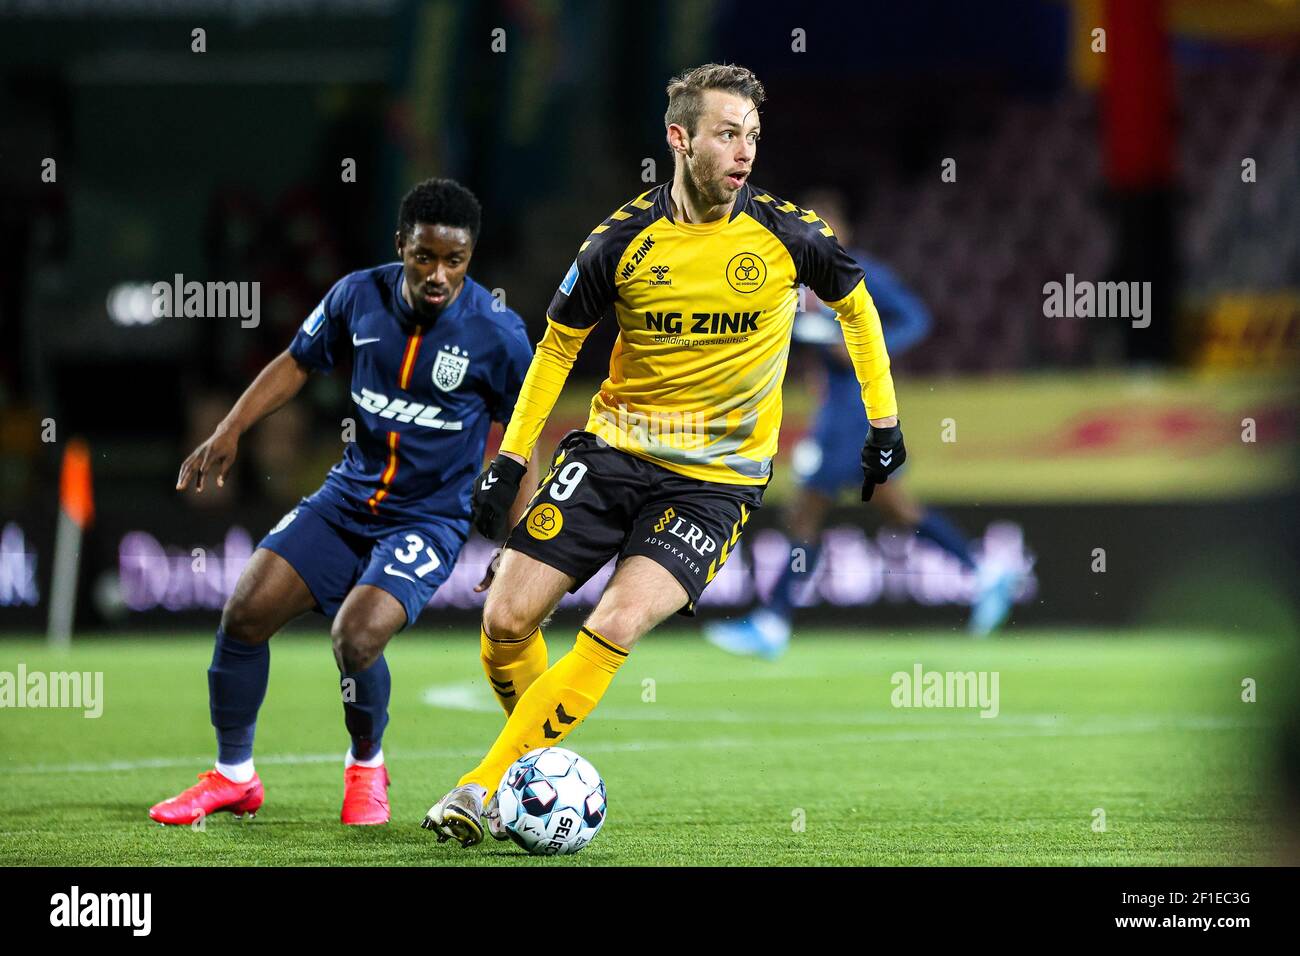 Farum, 7th Mar, 2021. Louka Prip (9) of Horsens during the 3F Superliga match between FC Nordsjaelland and AC Horsens in Right to Dream Park in Farum. (Photo Credit: